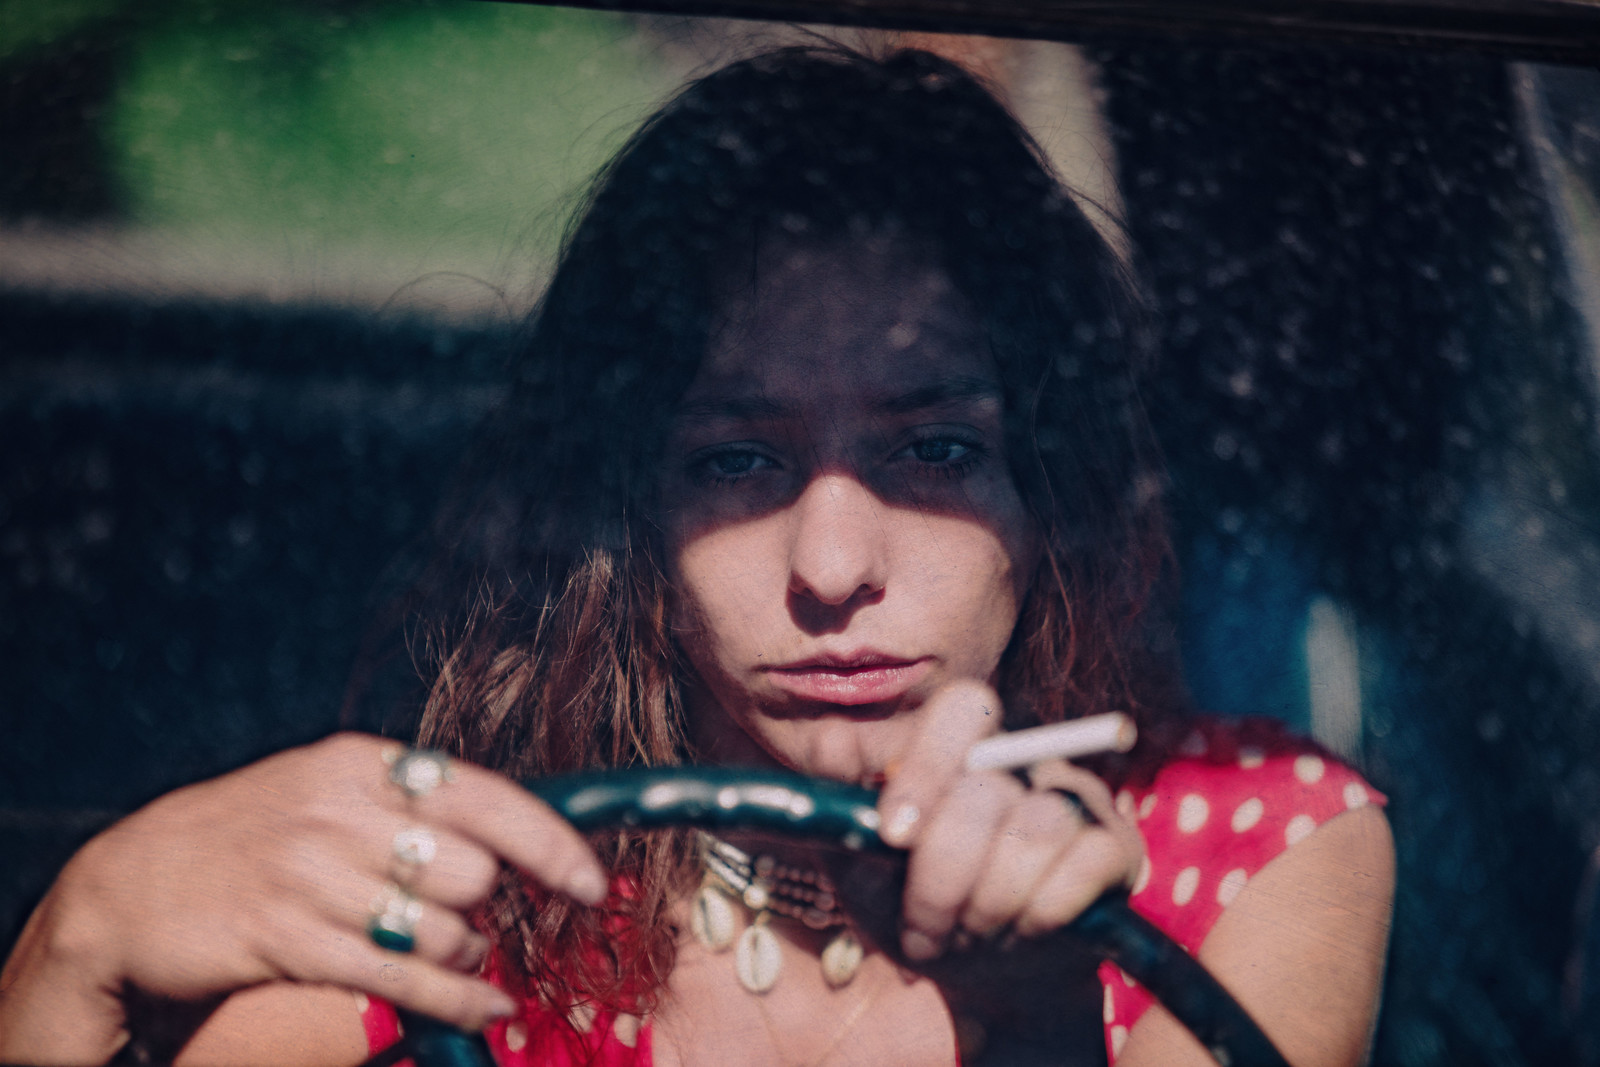 woman in car | by tonywoodphoto